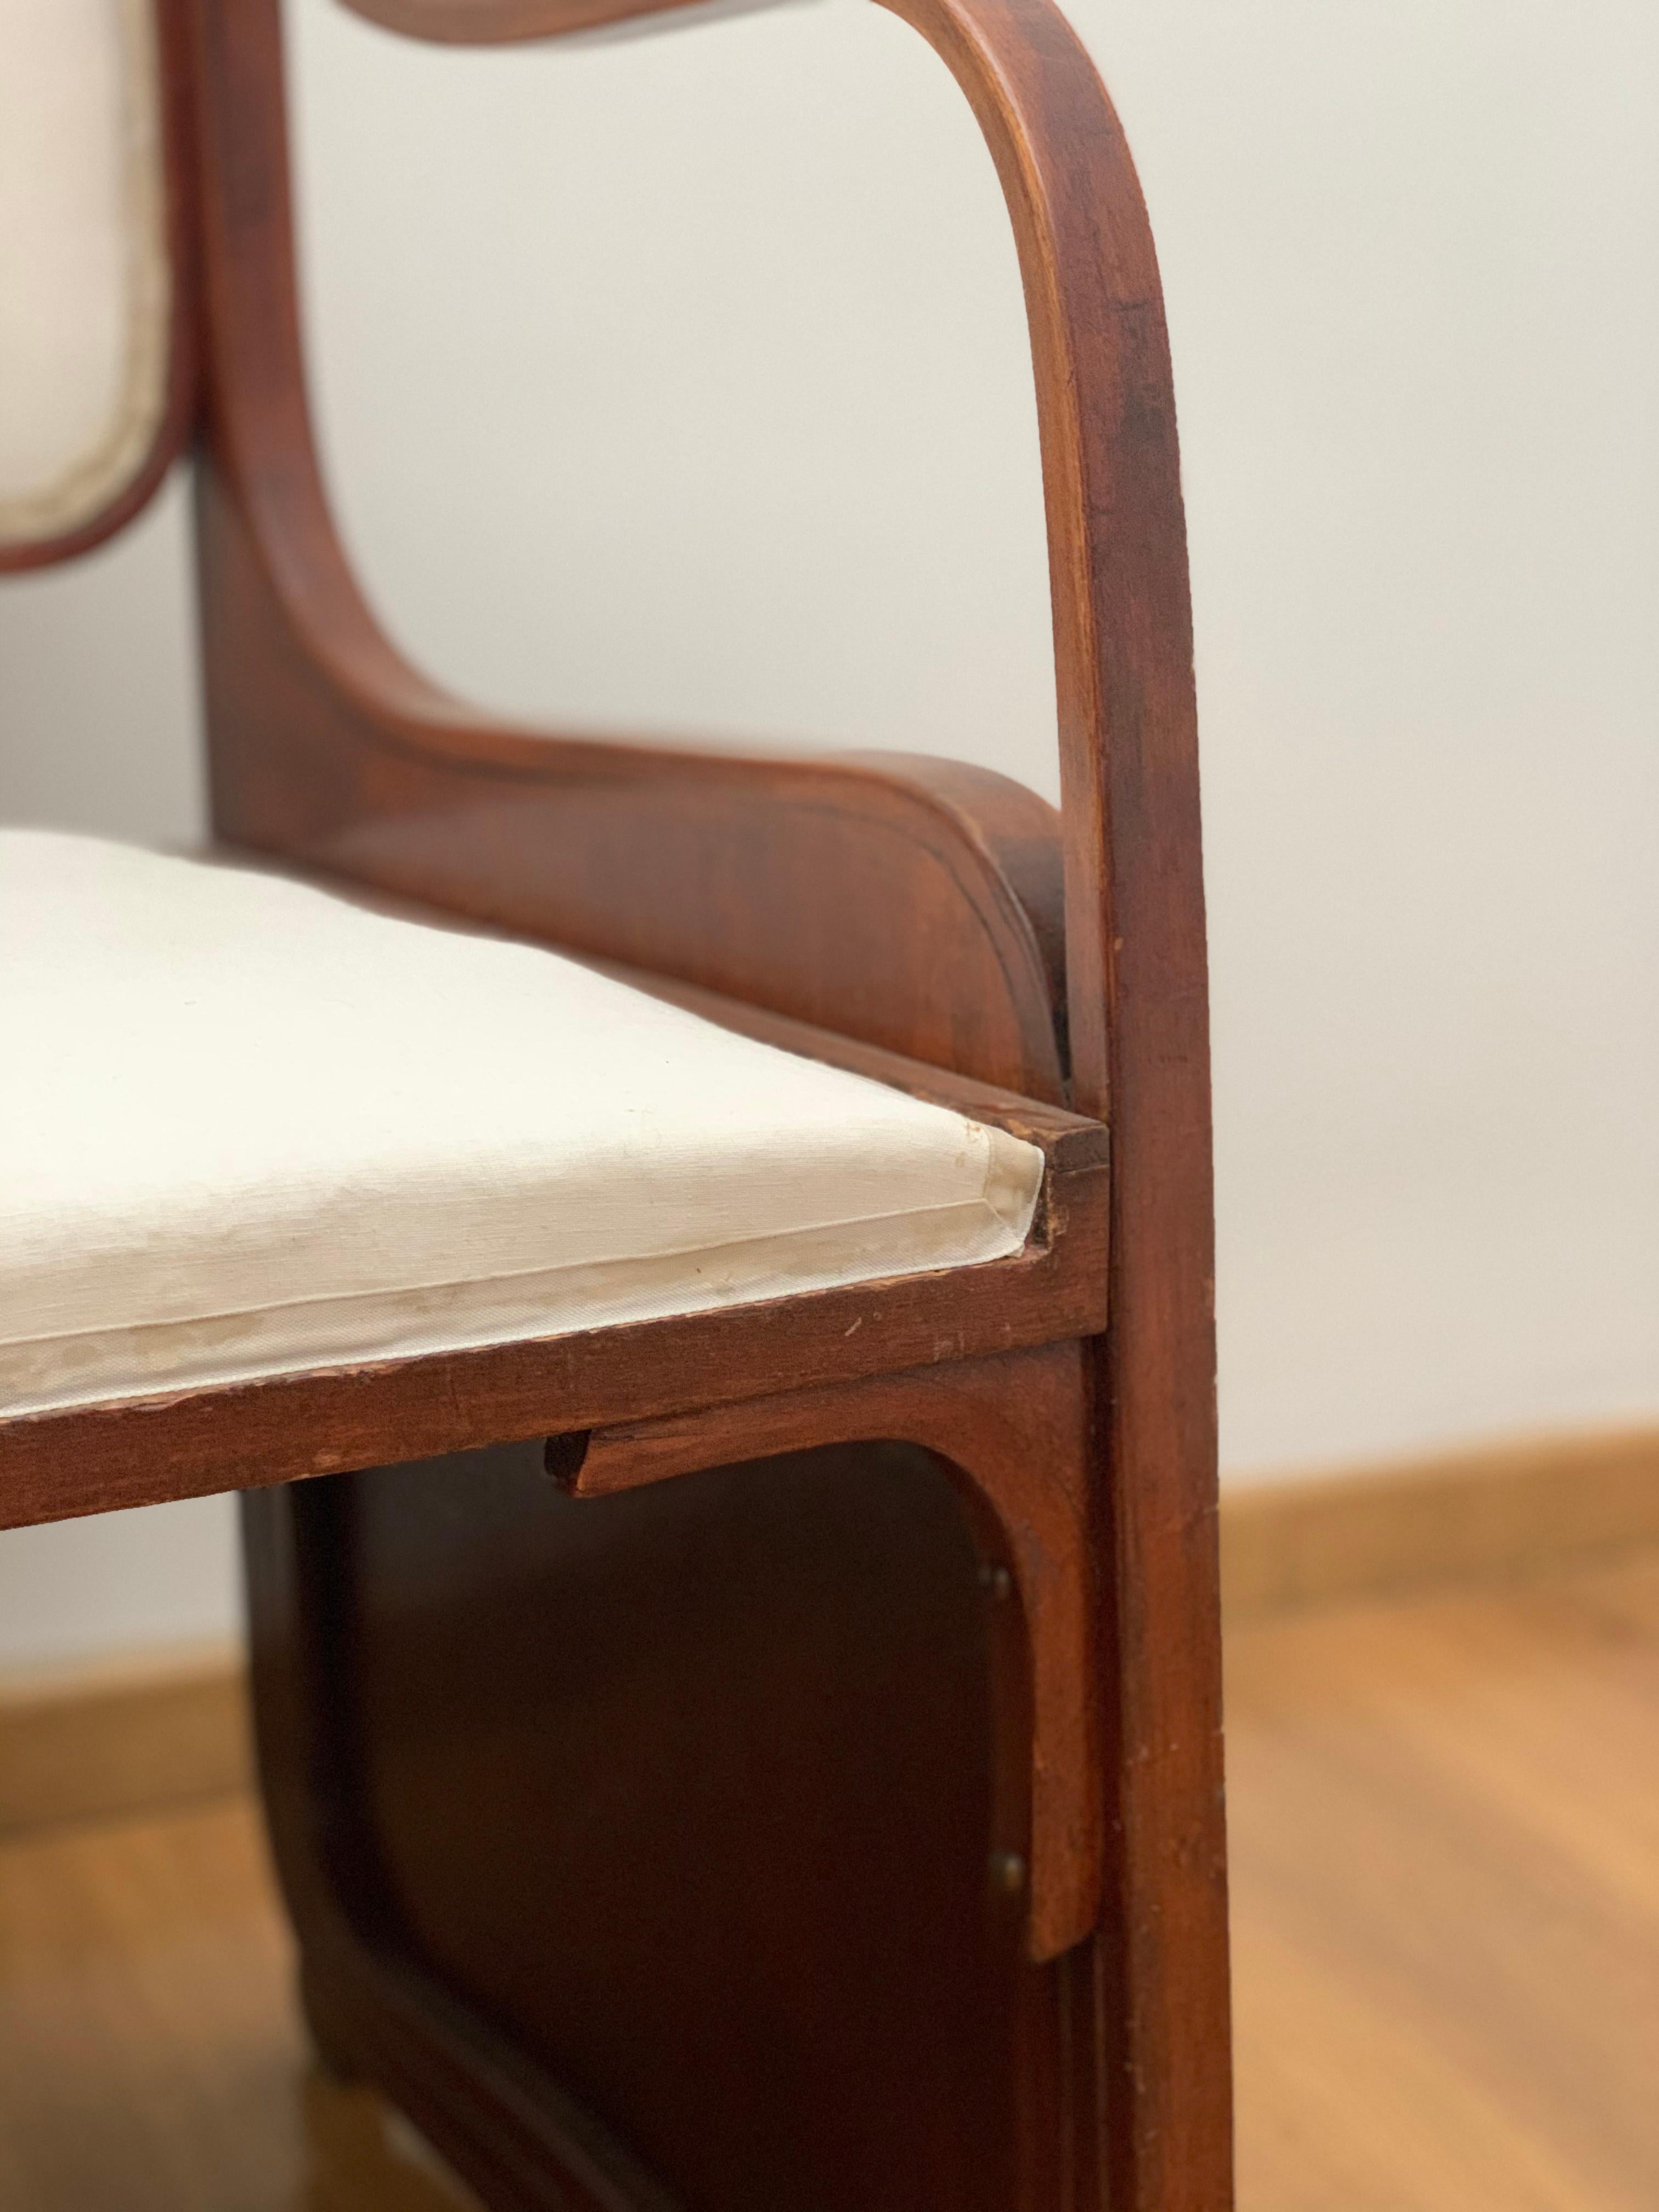 Pair of Bentwood Armchairs by Koloman Moser, Viennese Secession, circa 1900 In Good Condition For Sale In Brussels, BE